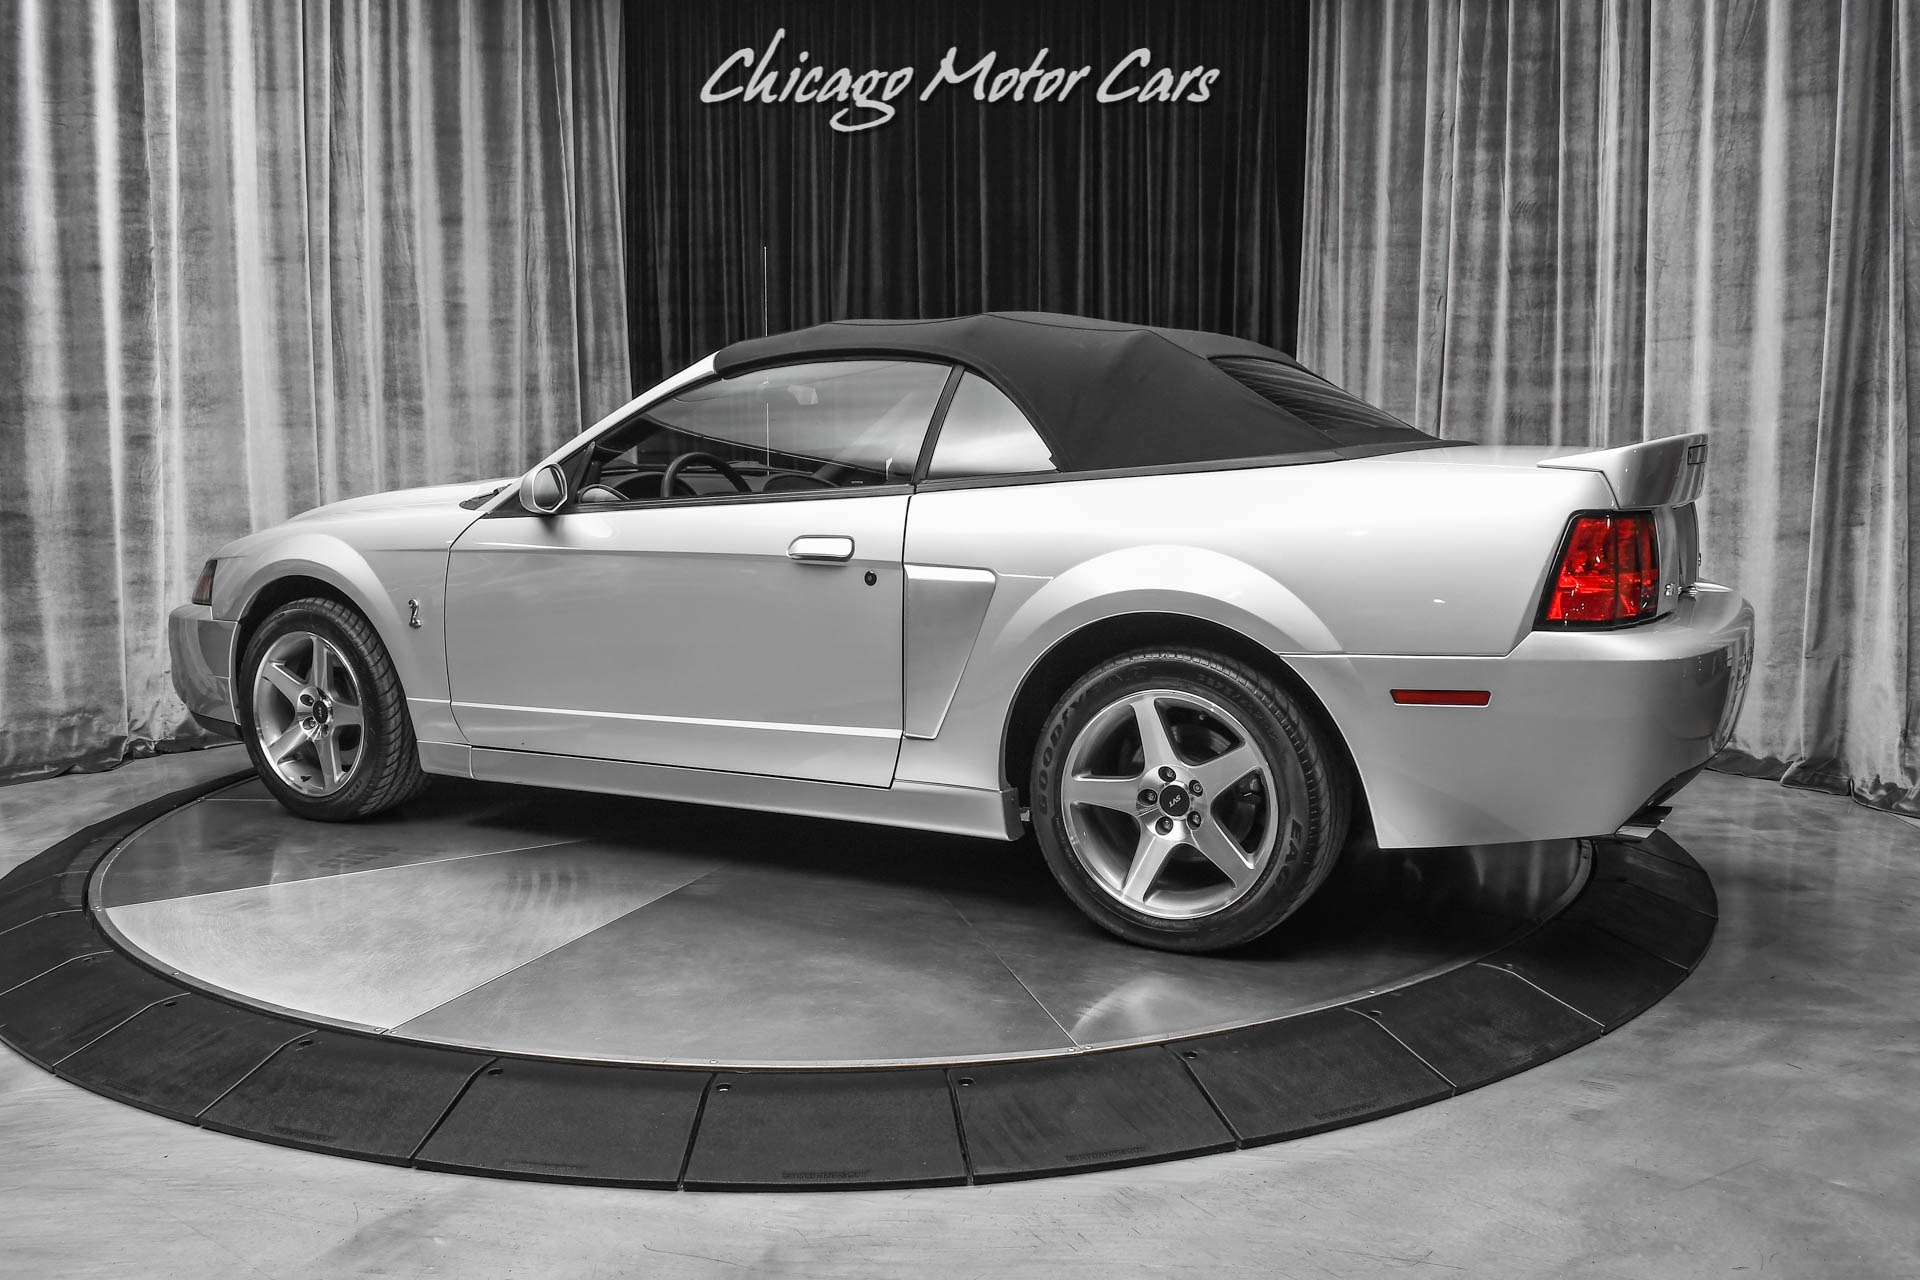 Used-2003-Ford-Mustang-SVT-Cobra-Convertible-Factory-Supercharged-450-HP-6-Speed-Manual-Only-7k-miles